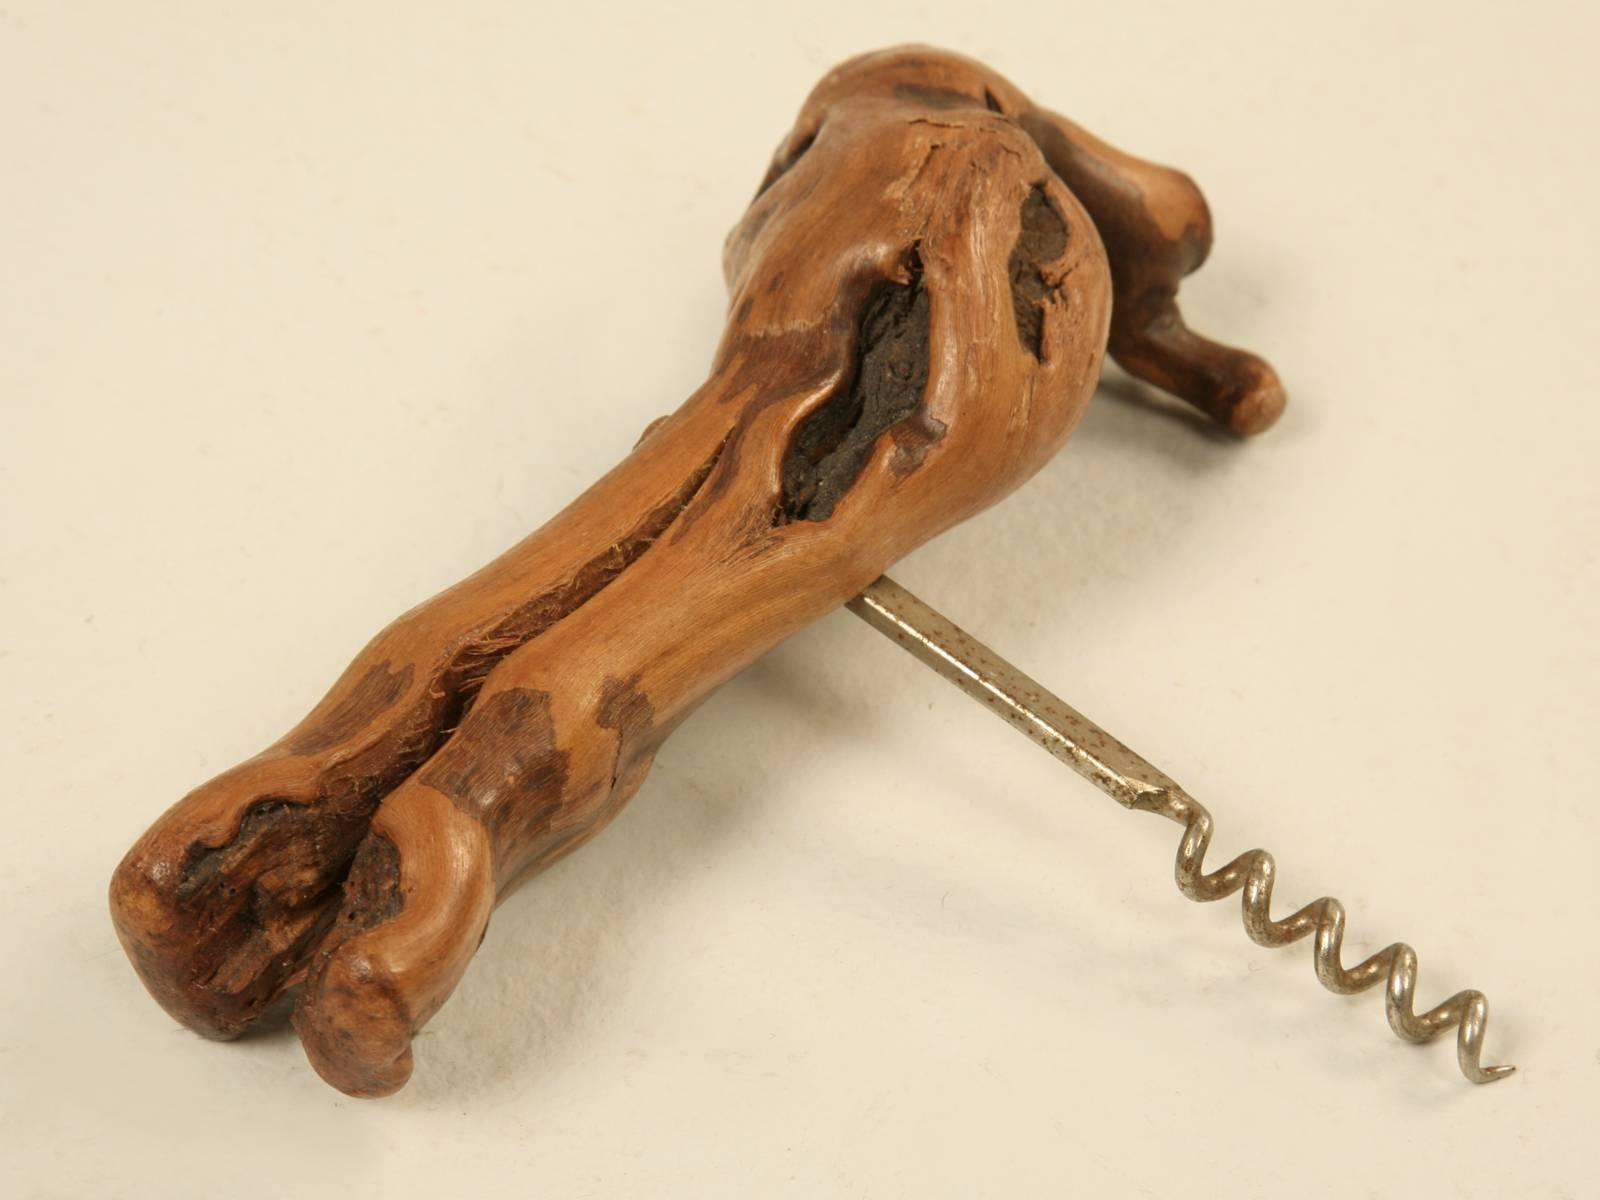 Old French corkscrew fabricated from a grapevine and what could possibly be more appropriate?